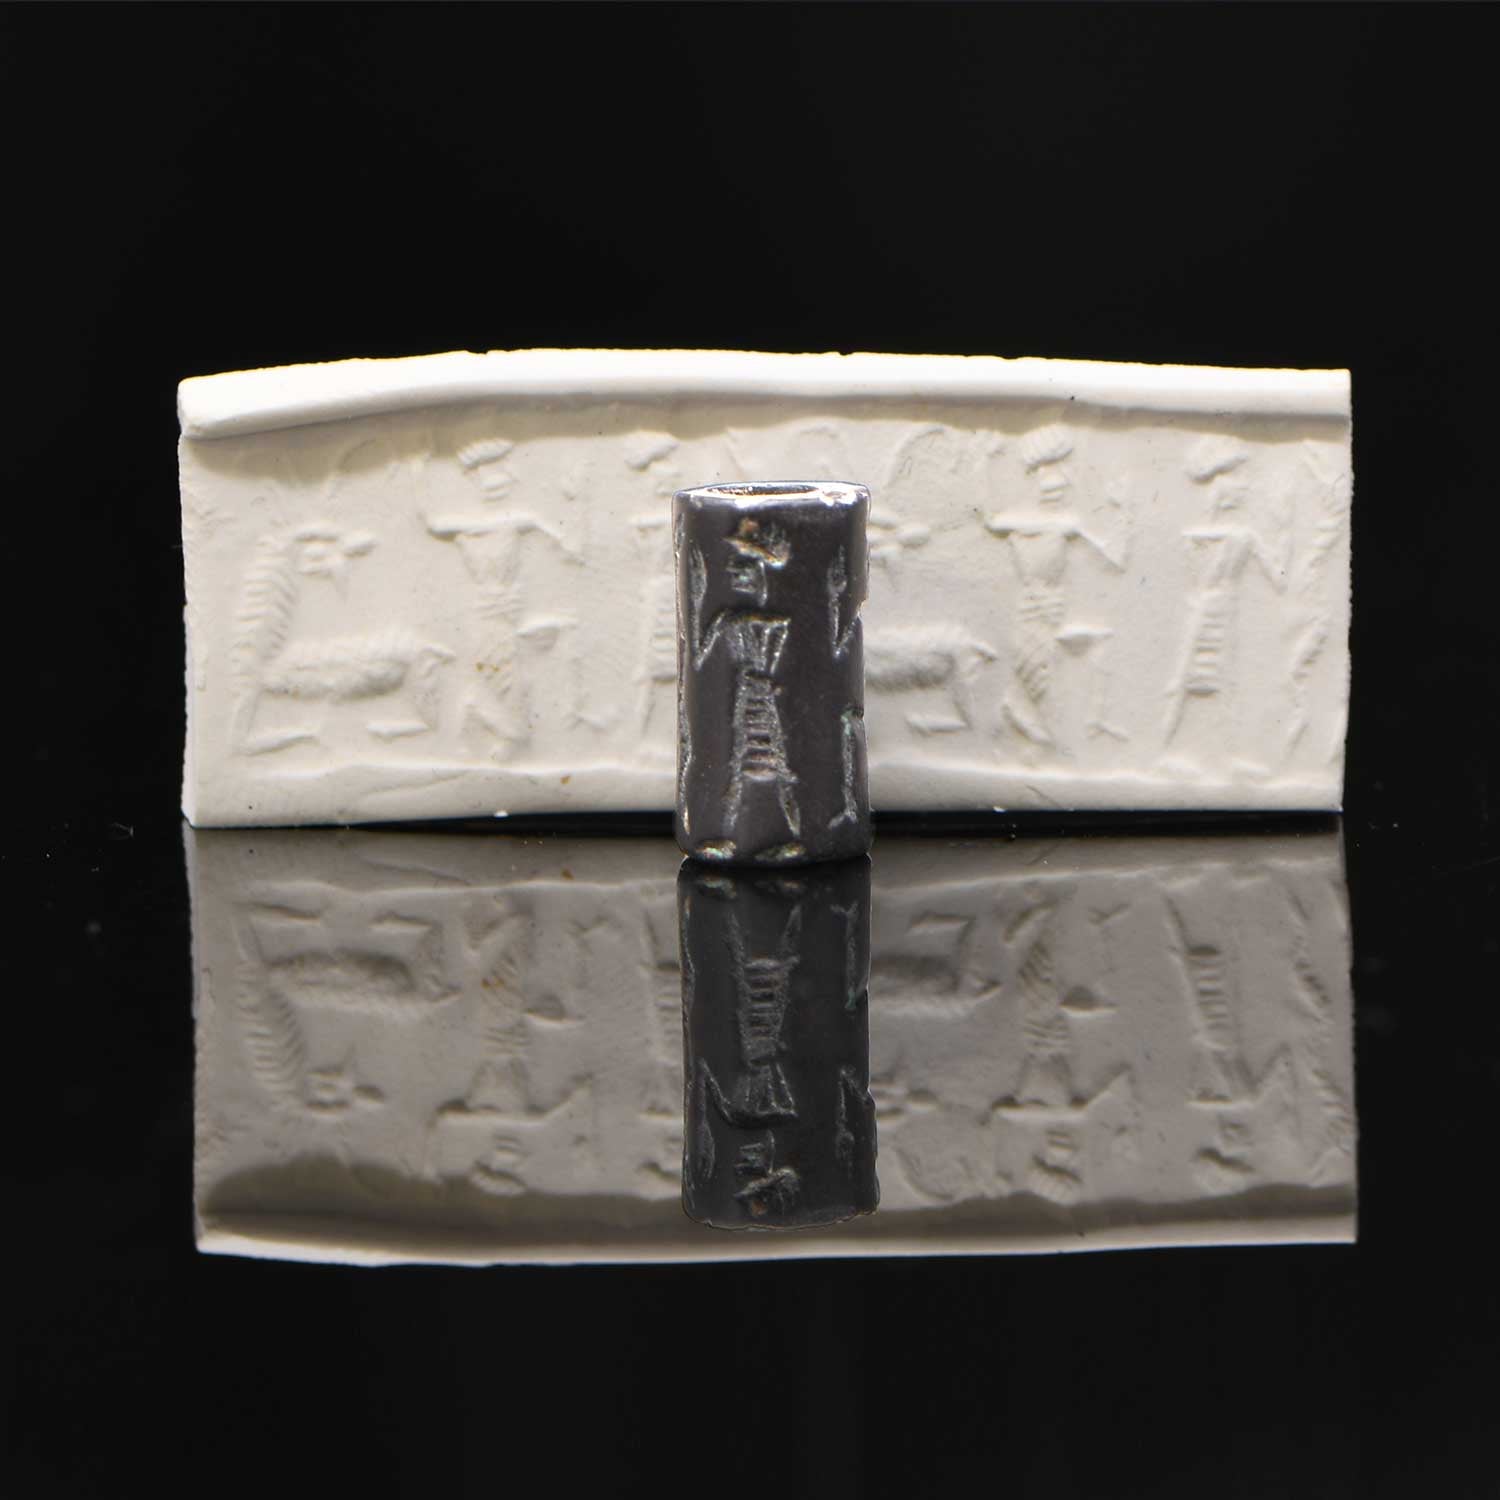 An Old Babylonian Cylinder Seal, ca. 2000 - 1600 BCE